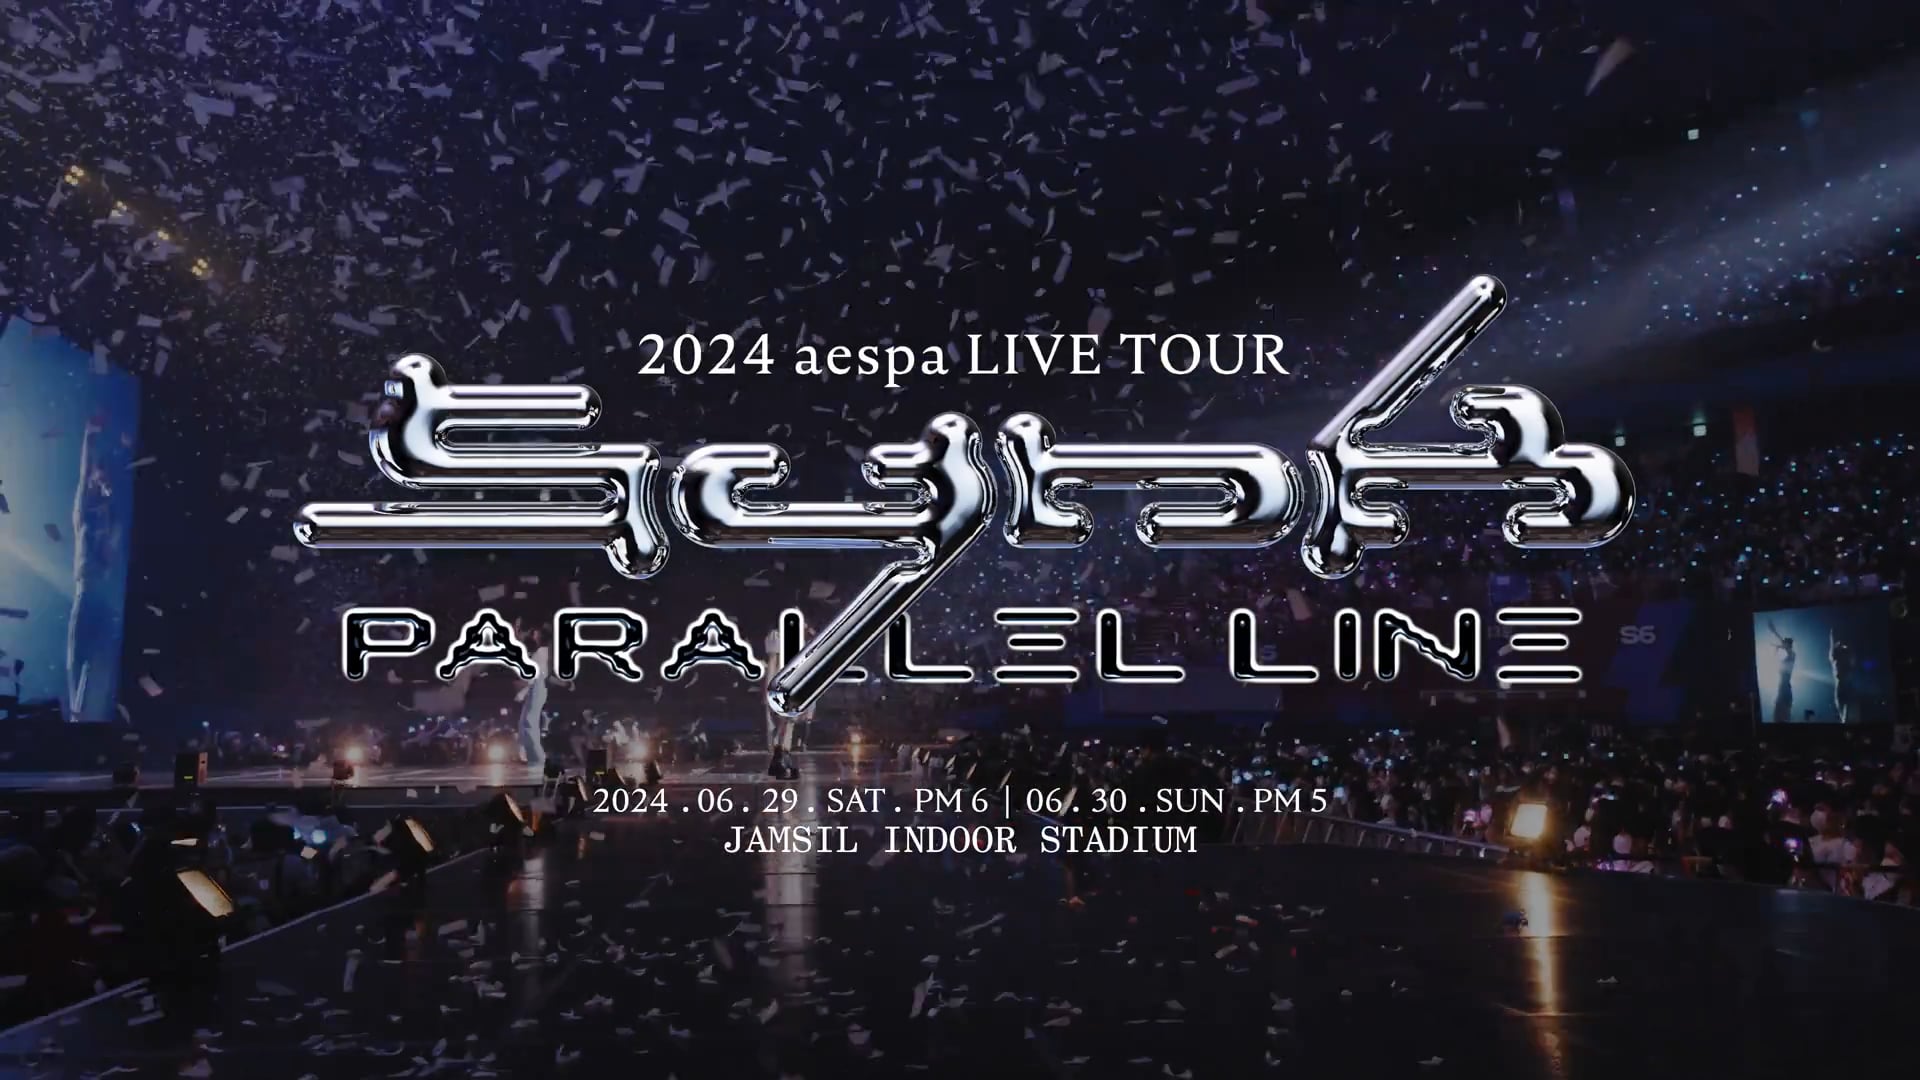 240419 2024 aespa LIVE TOUR - SYNK : PARALLEL LINE in SEOUL (Coming Soon Teaser)